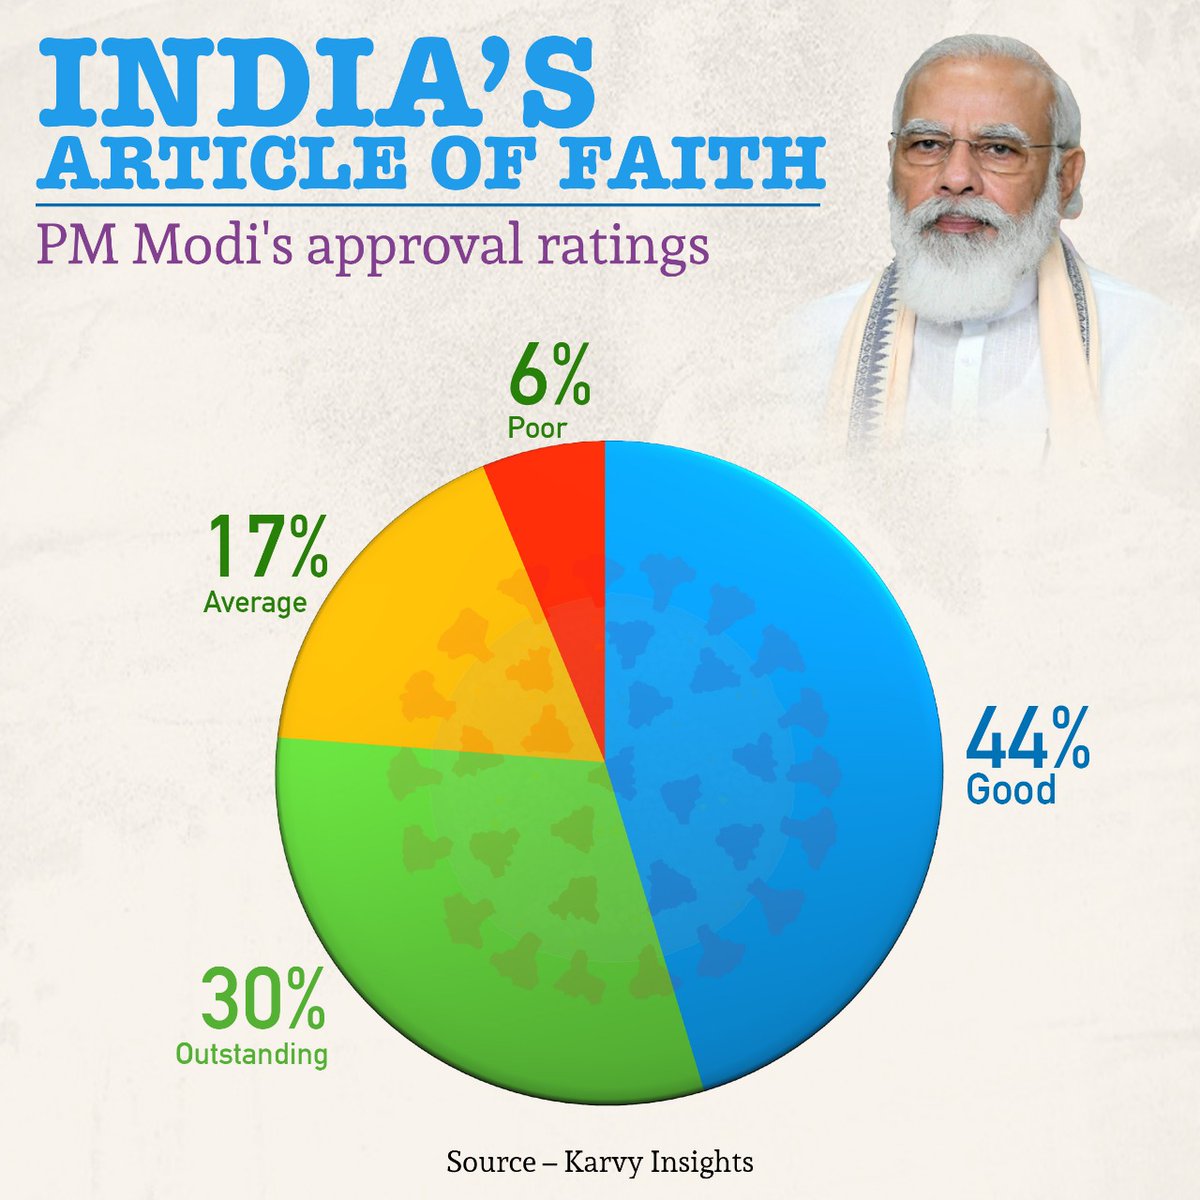 Leadership of PM @narendramodi is India’s article of faith!

Overwhelming 74% respondents in a nation-wide survey by India Today-Karvy Insights rate his performance in the battle against COVID as ‘good to outstanding’.

#IndiaTrustsModi